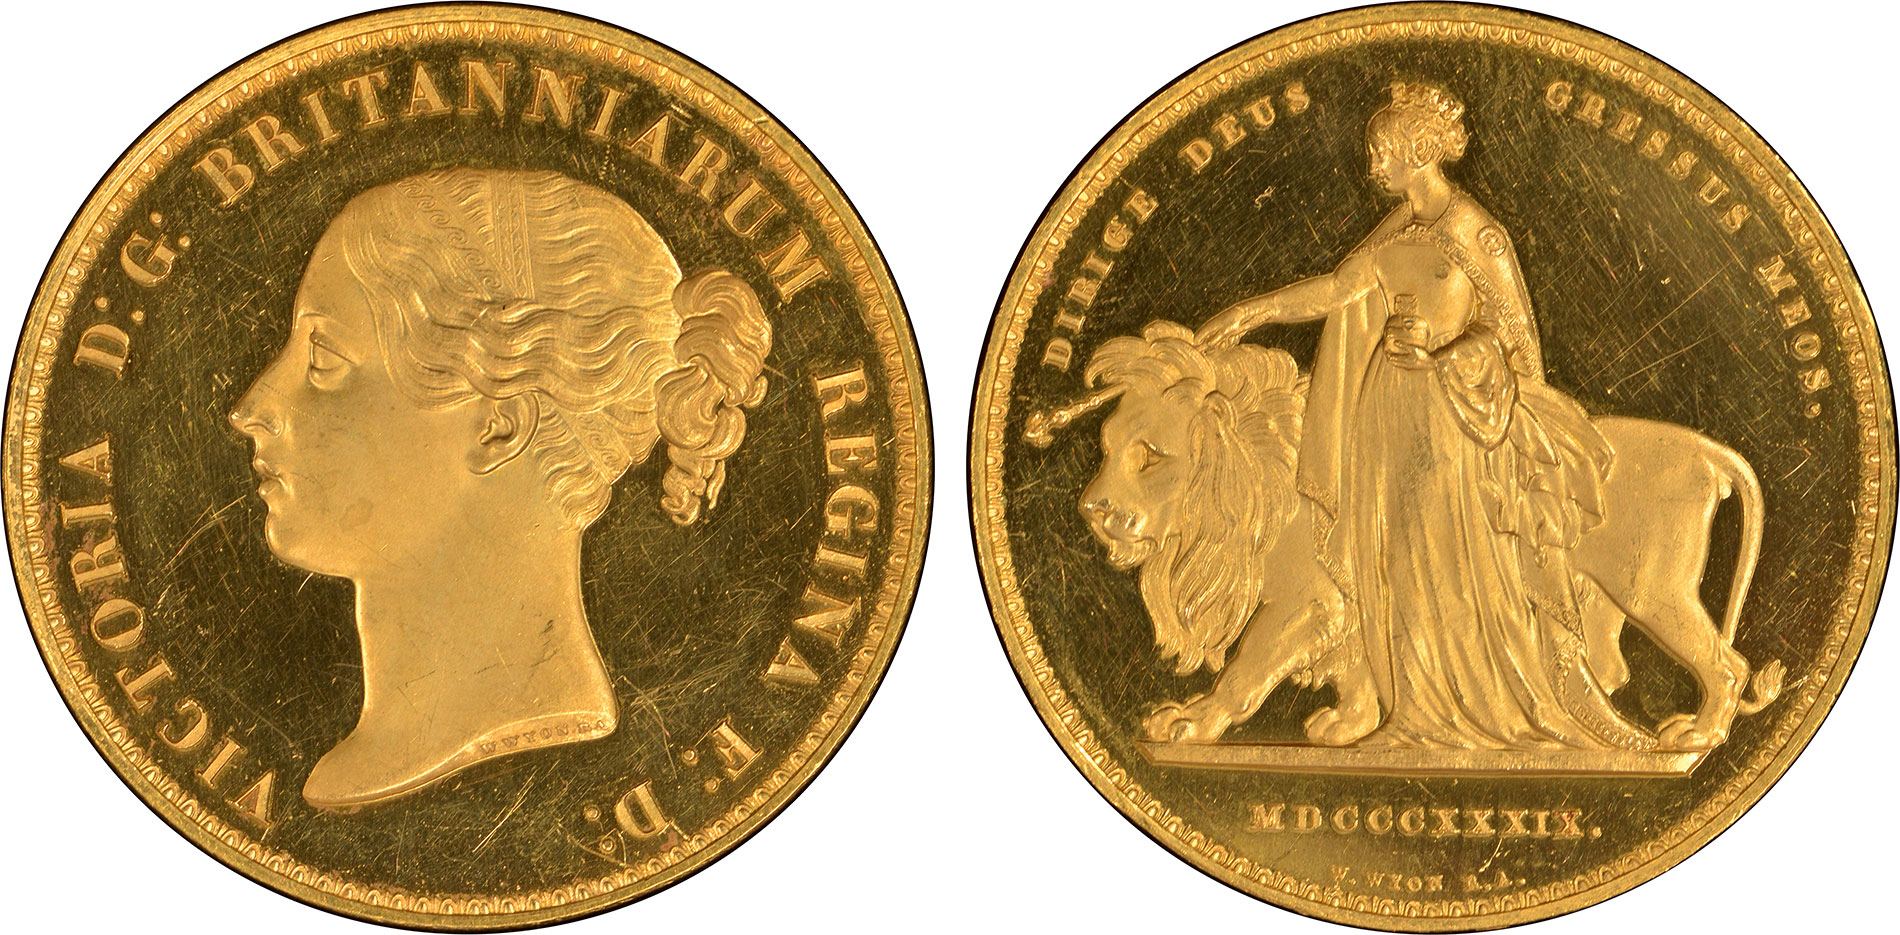 Heritage Auctions: Gold Coin Price Guide - Lookup Value of Gold